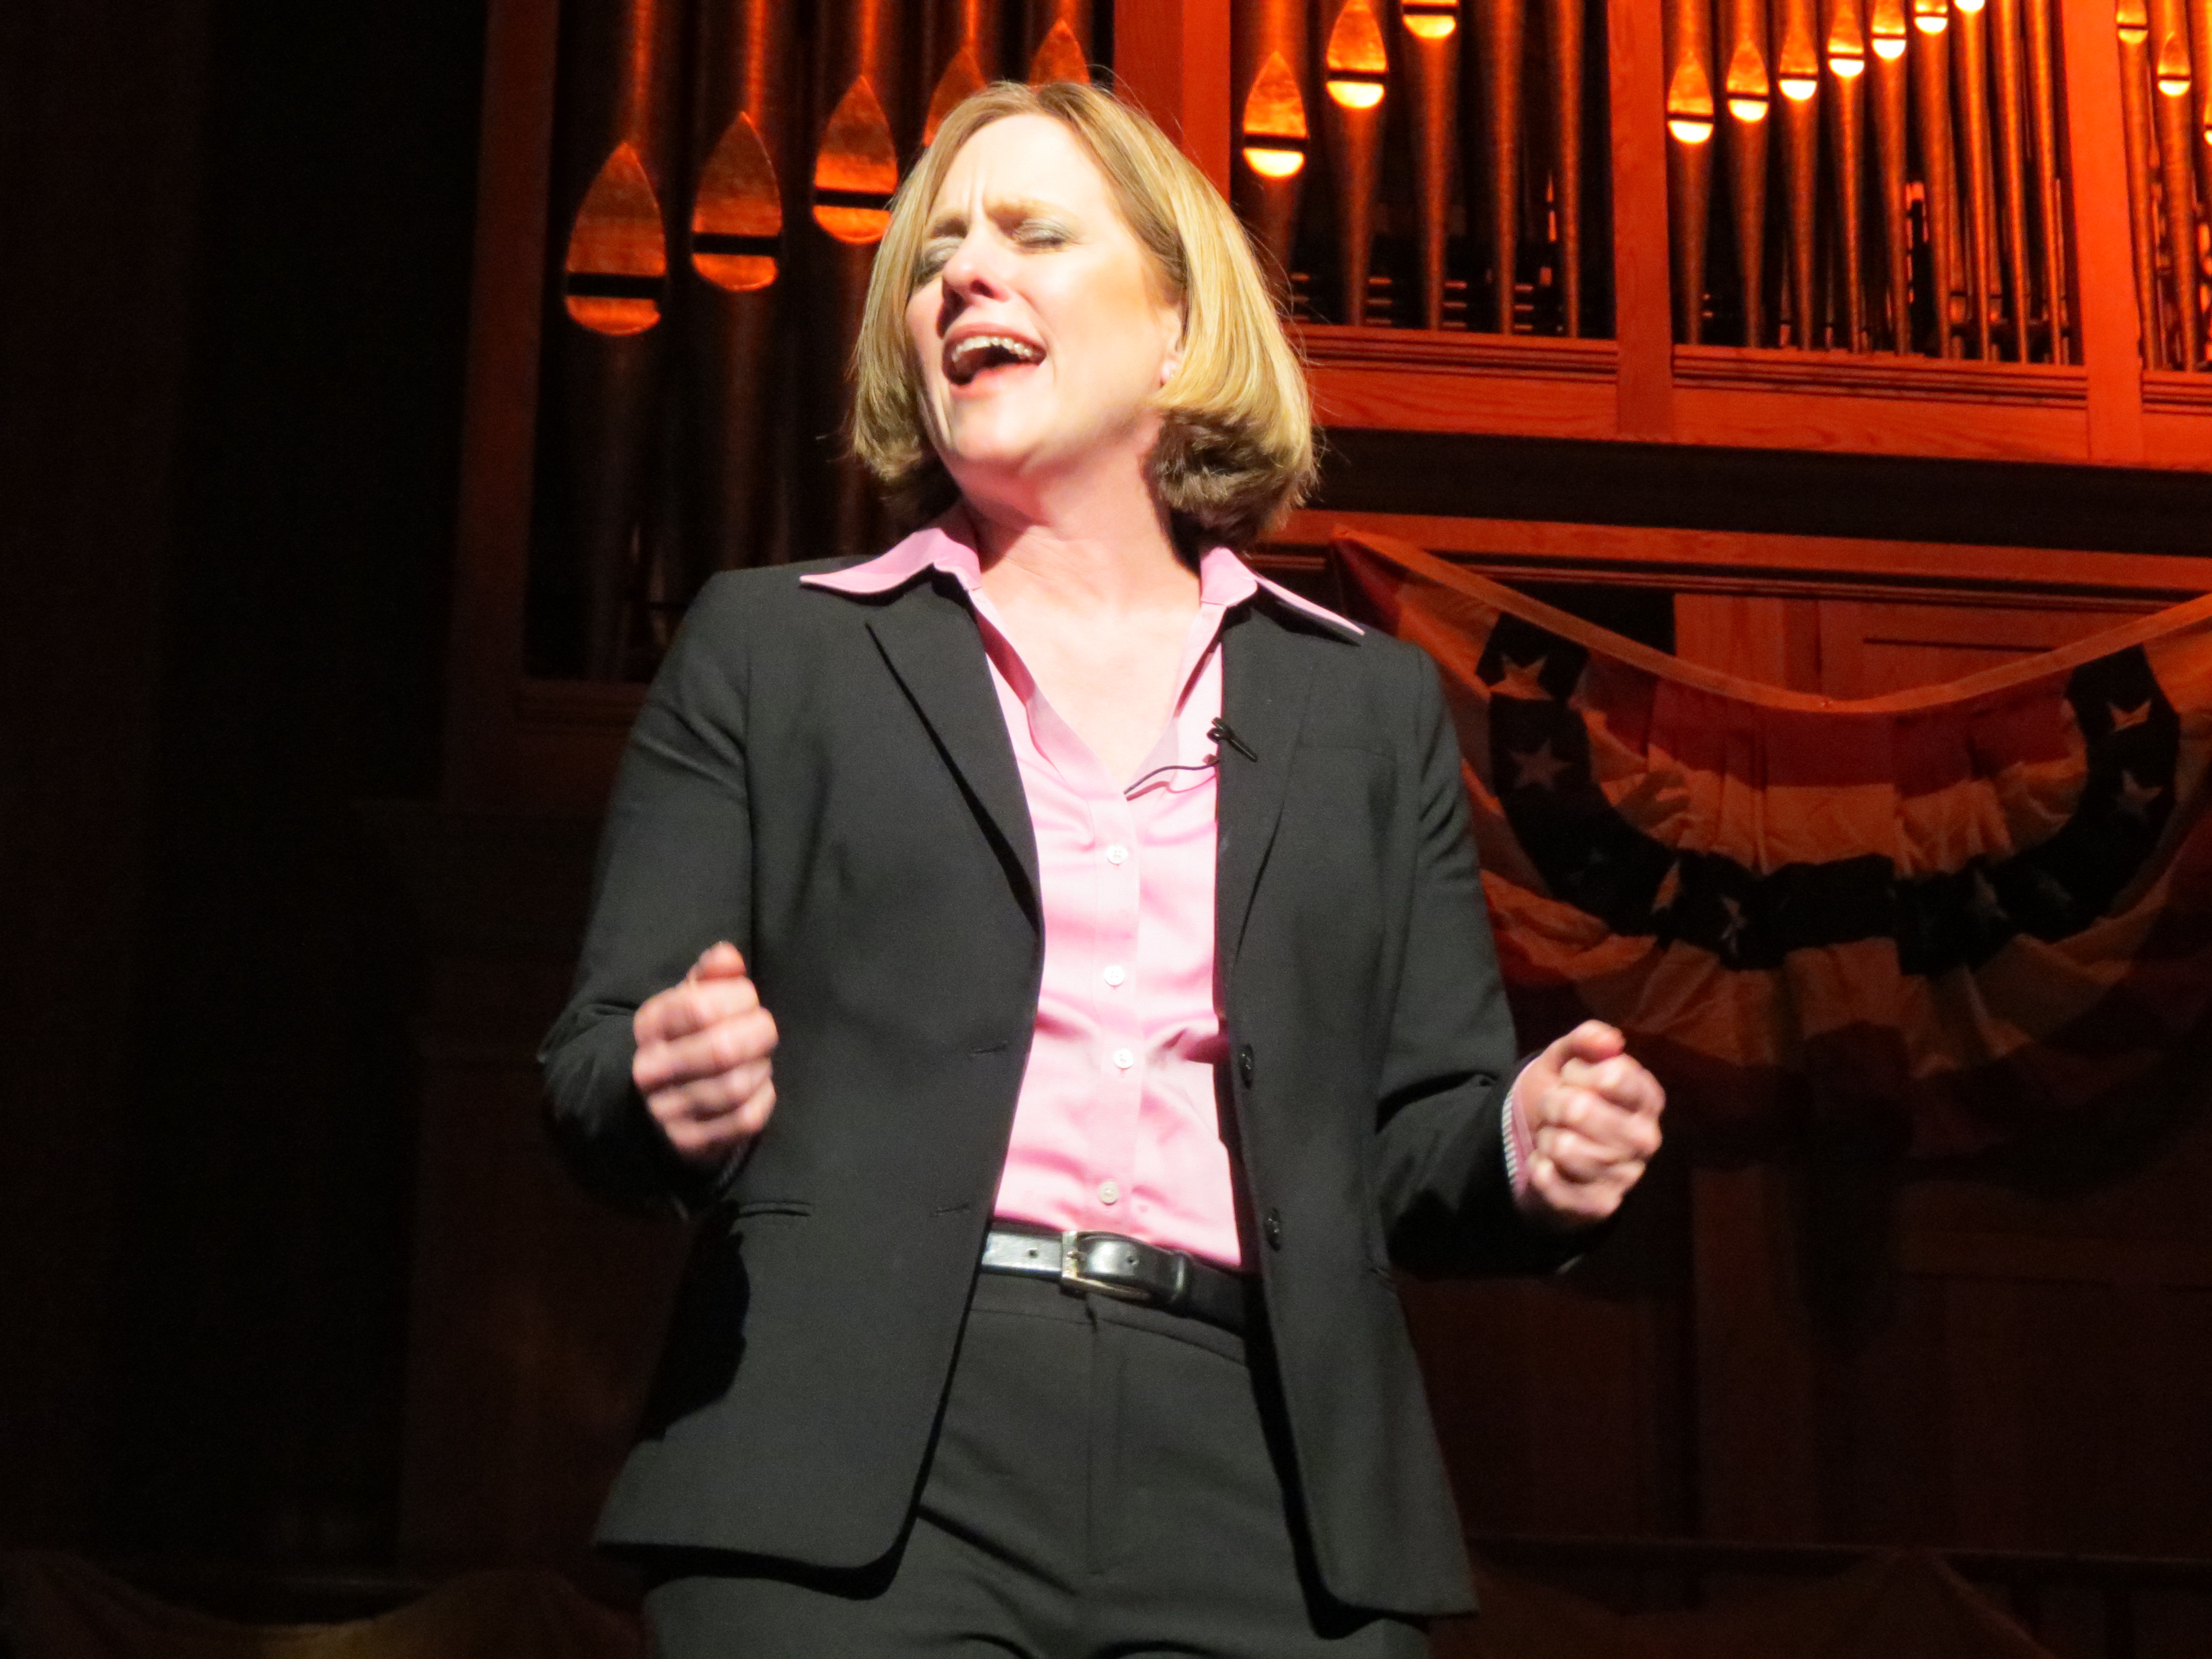 After soliciting advice on her new post from outgoing Borough President Helen Marshall and former Borough President Claire Shulman, Borough President-elect Melinda Katz belts out a version of "On My Own" from "Les Miserables."